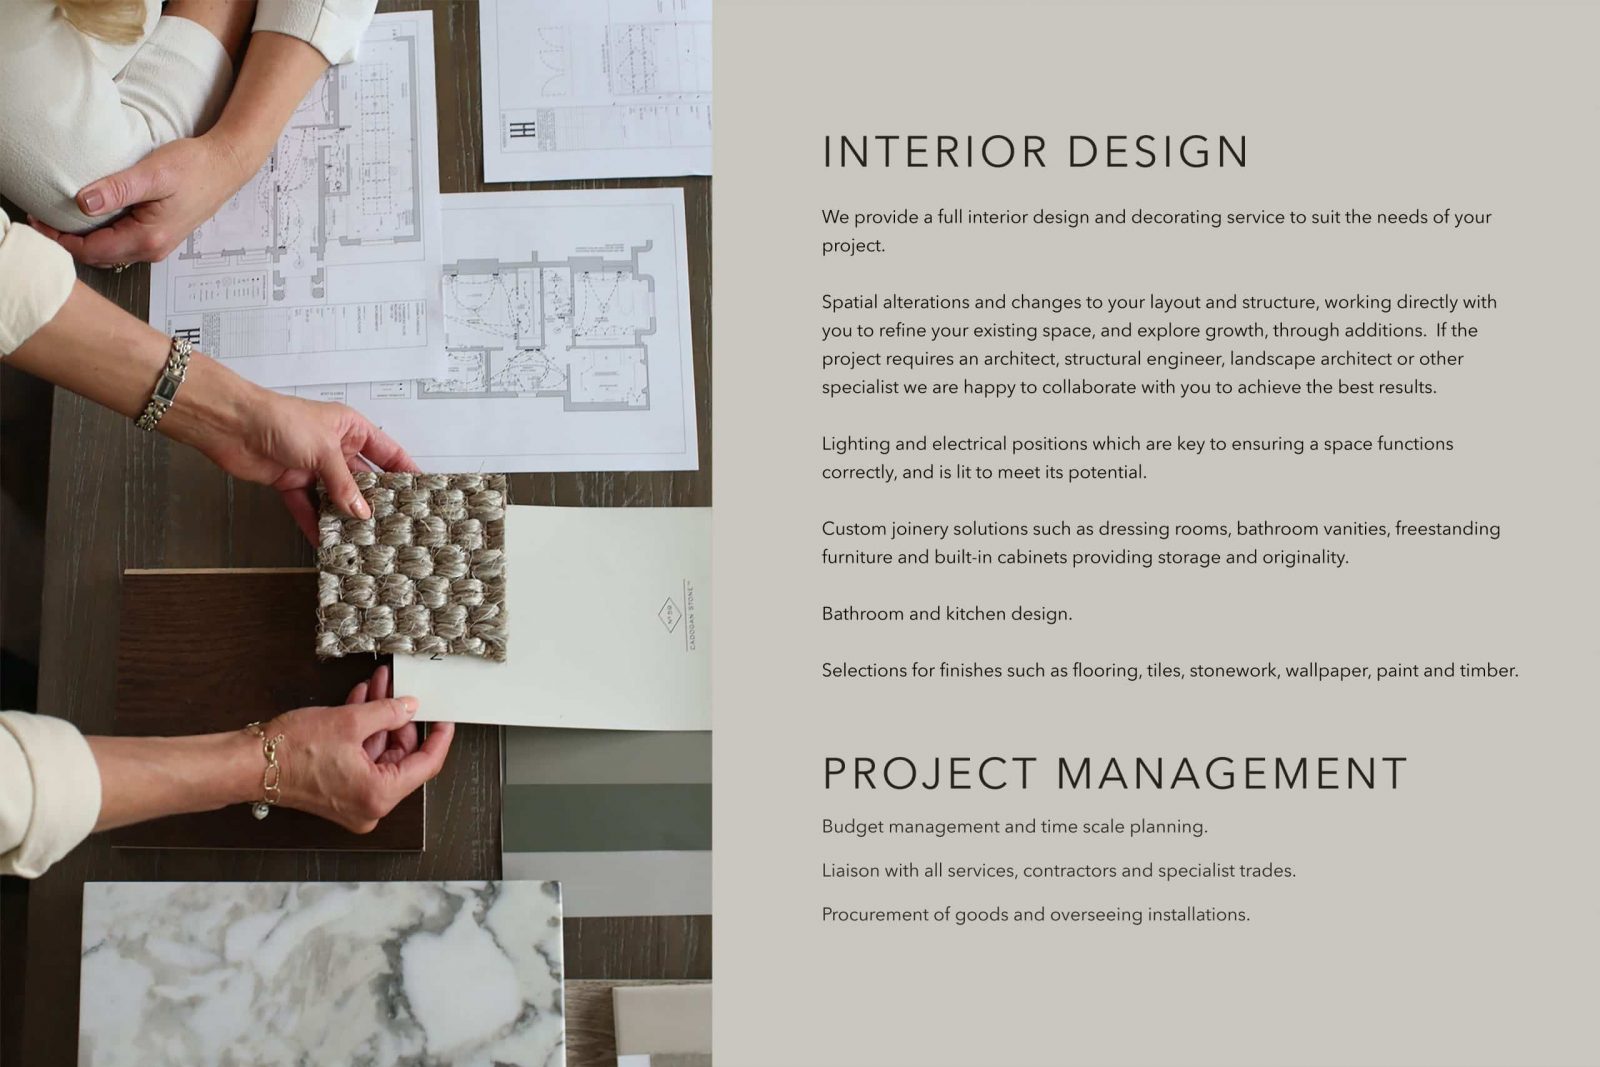 Interior Design and Project Management